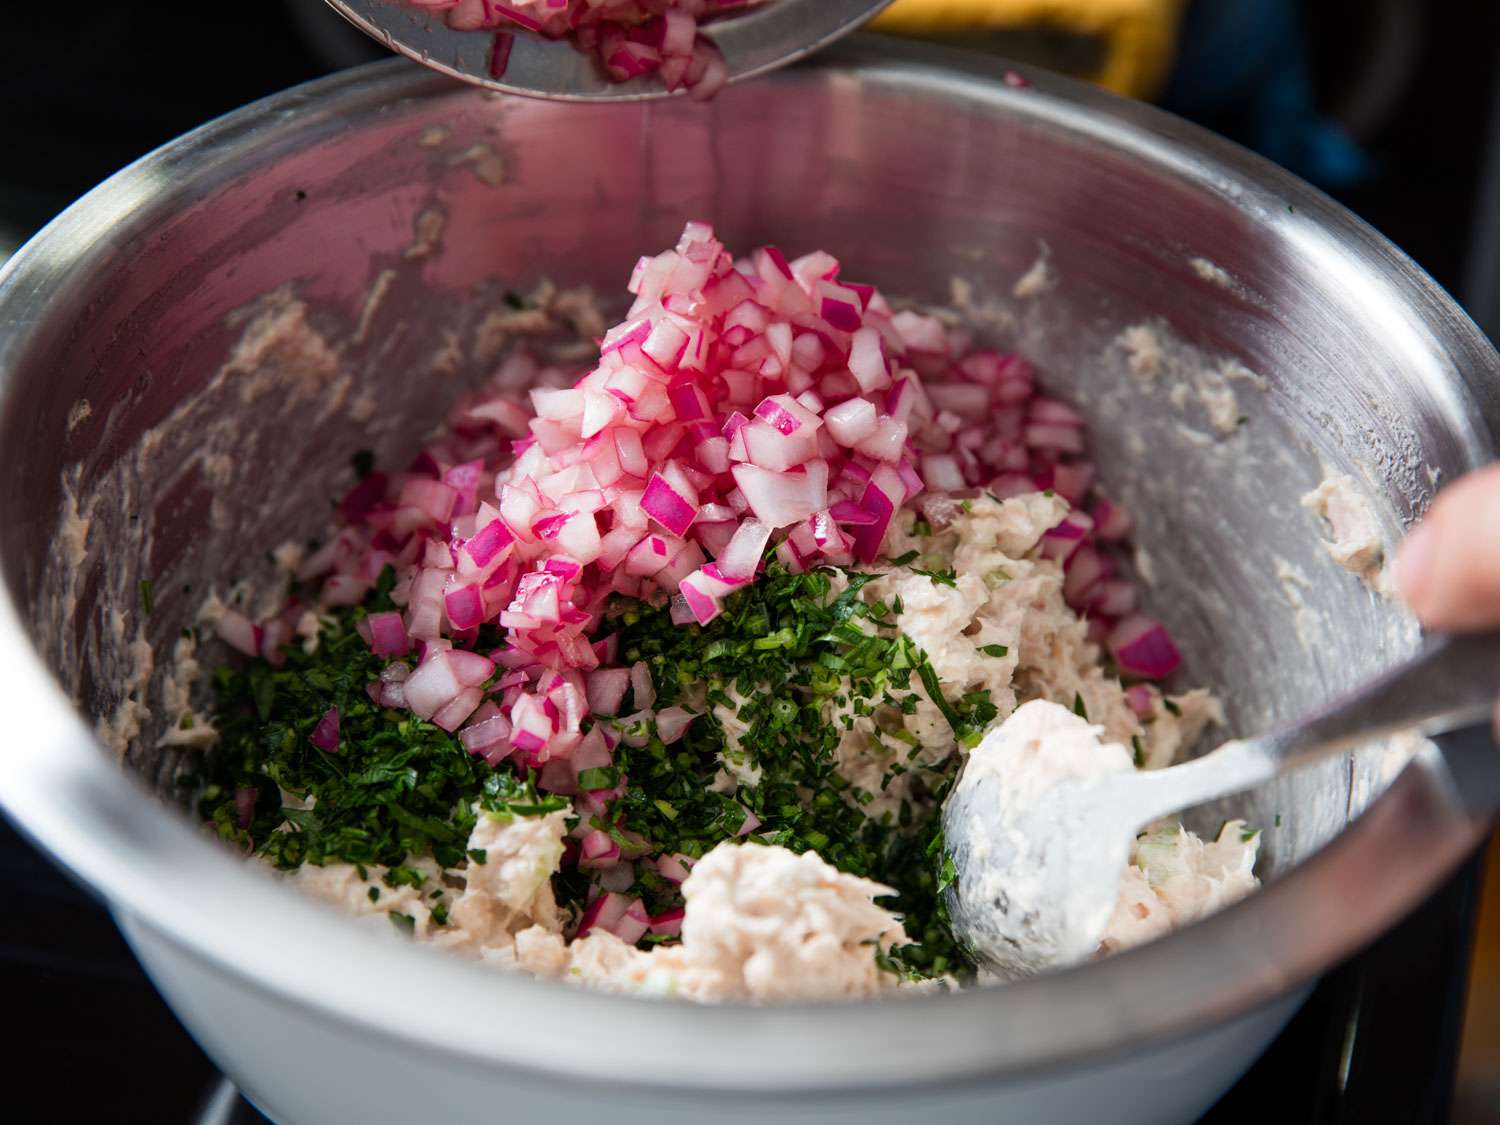 Pickled onion, parsley, and celery are added to the tuna mixture.